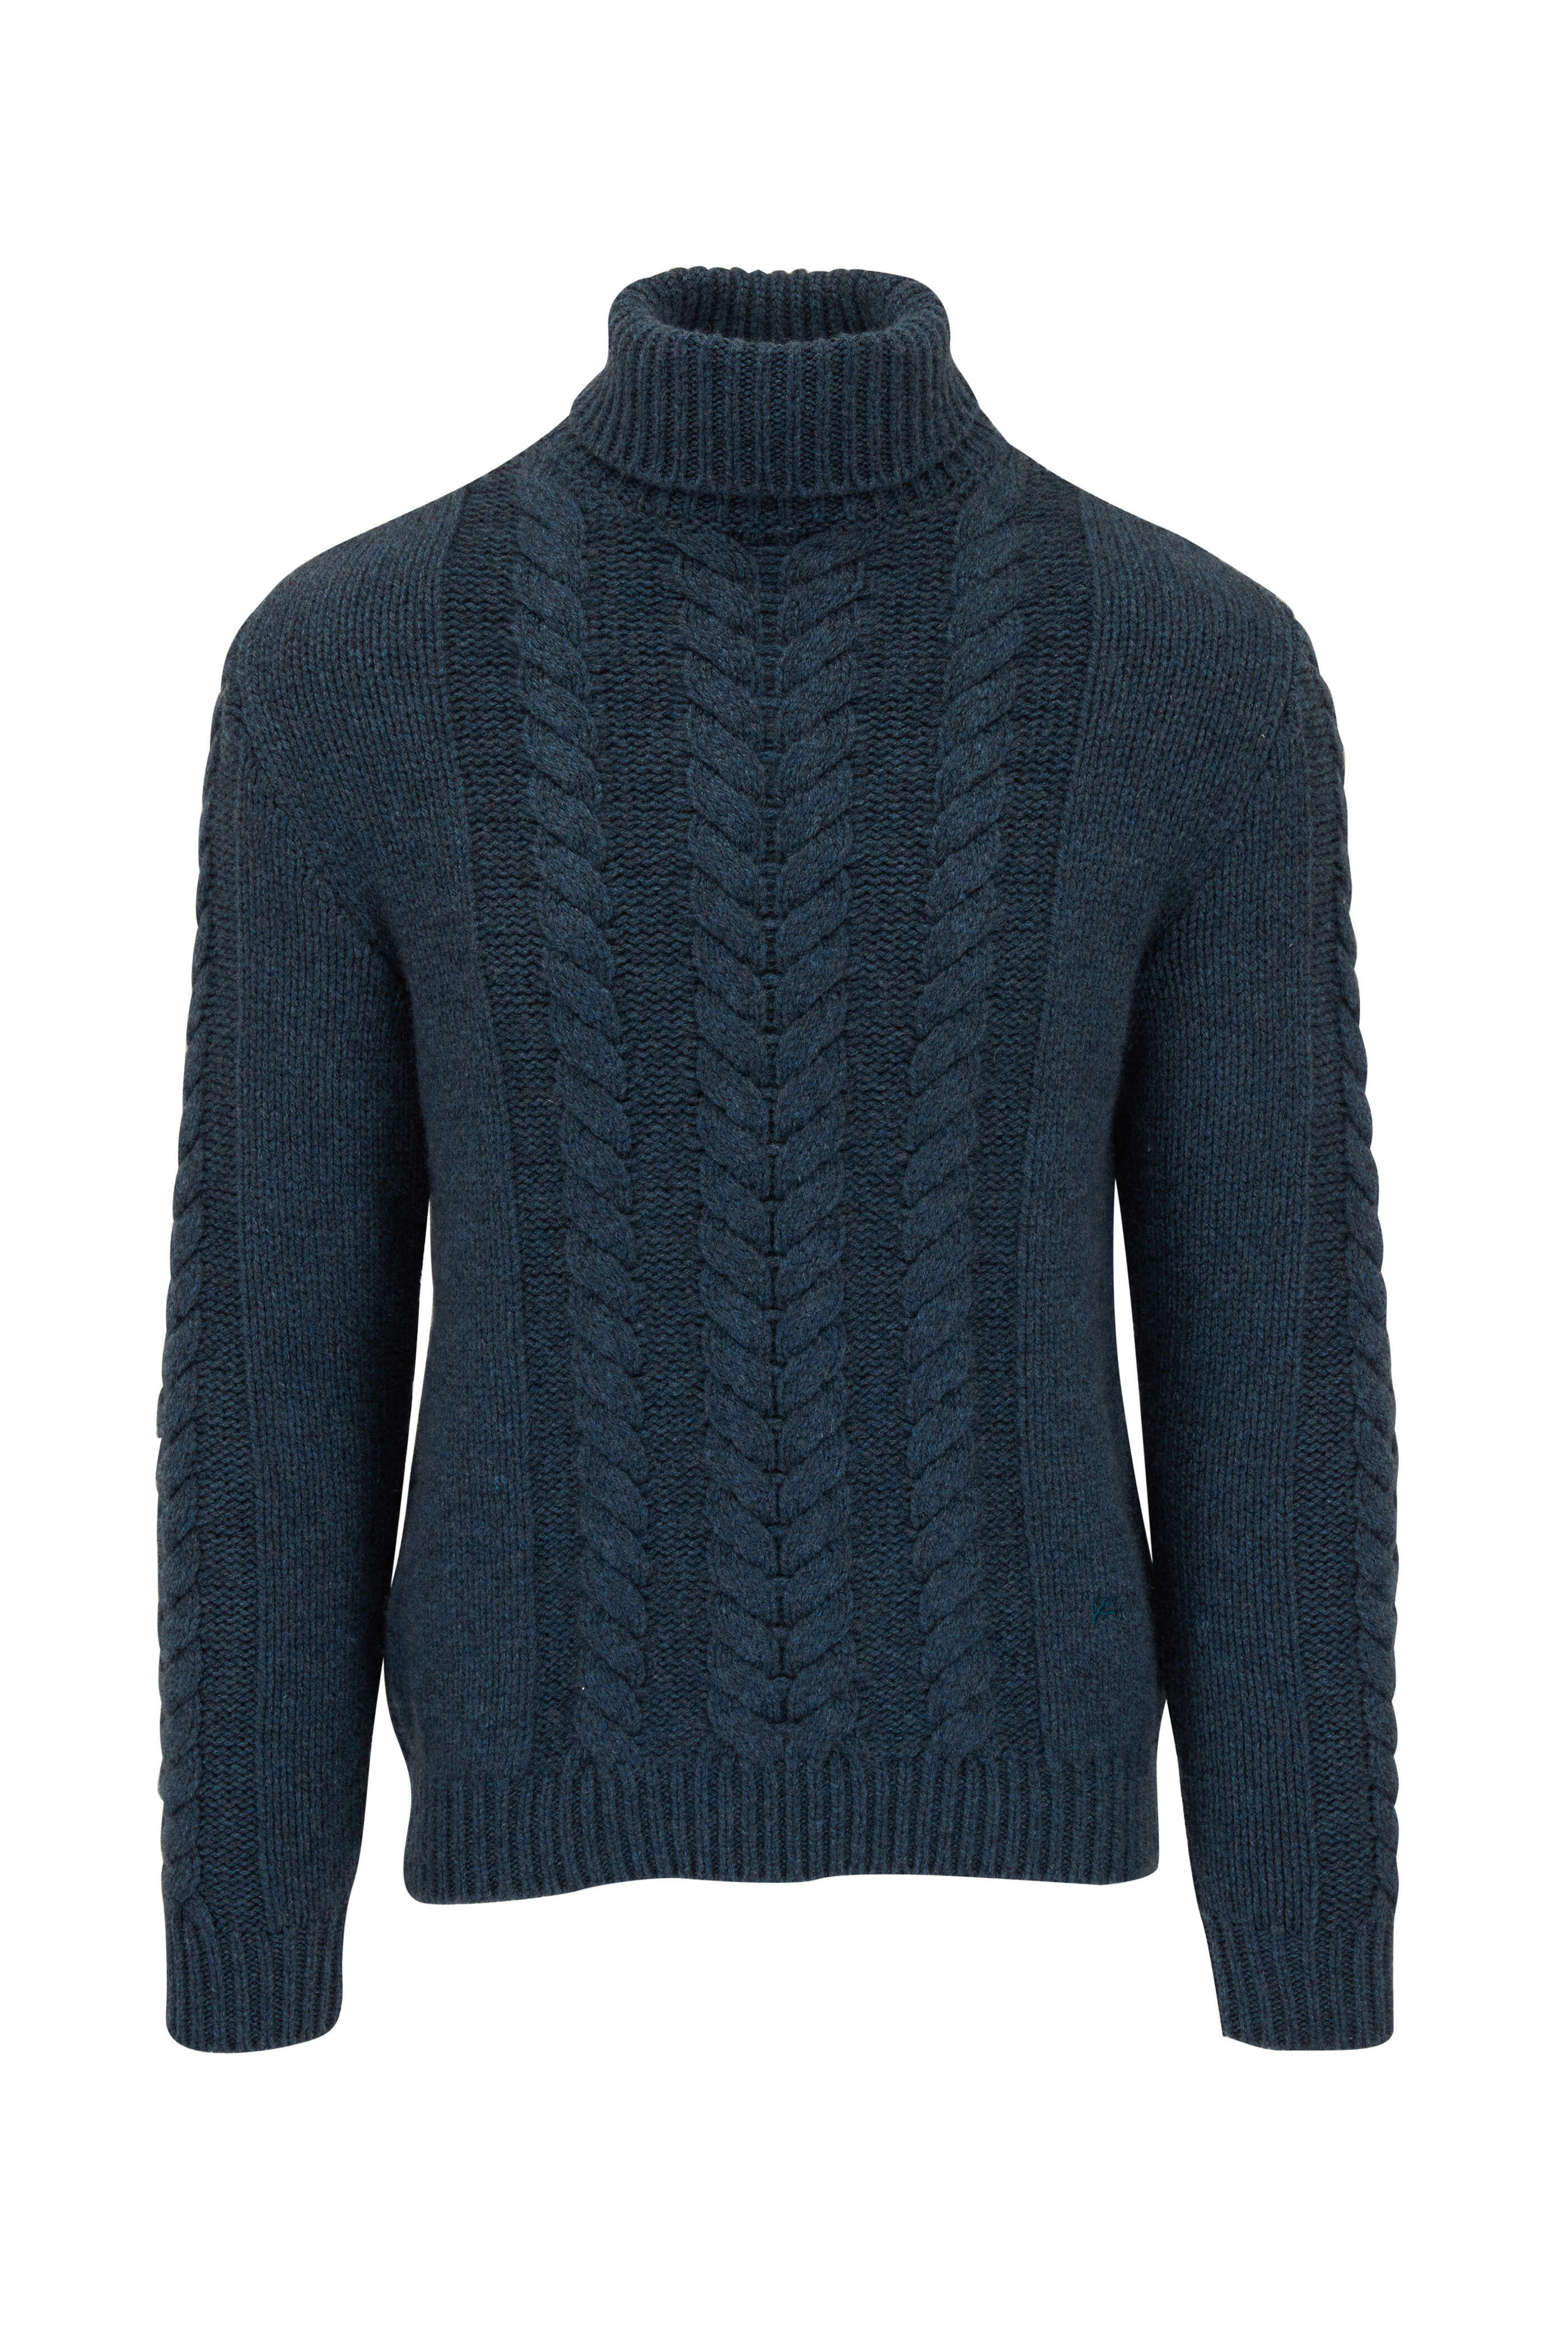 Isaia - Teal Cable Knit Turtleneck Sweater | Mitchell Stores